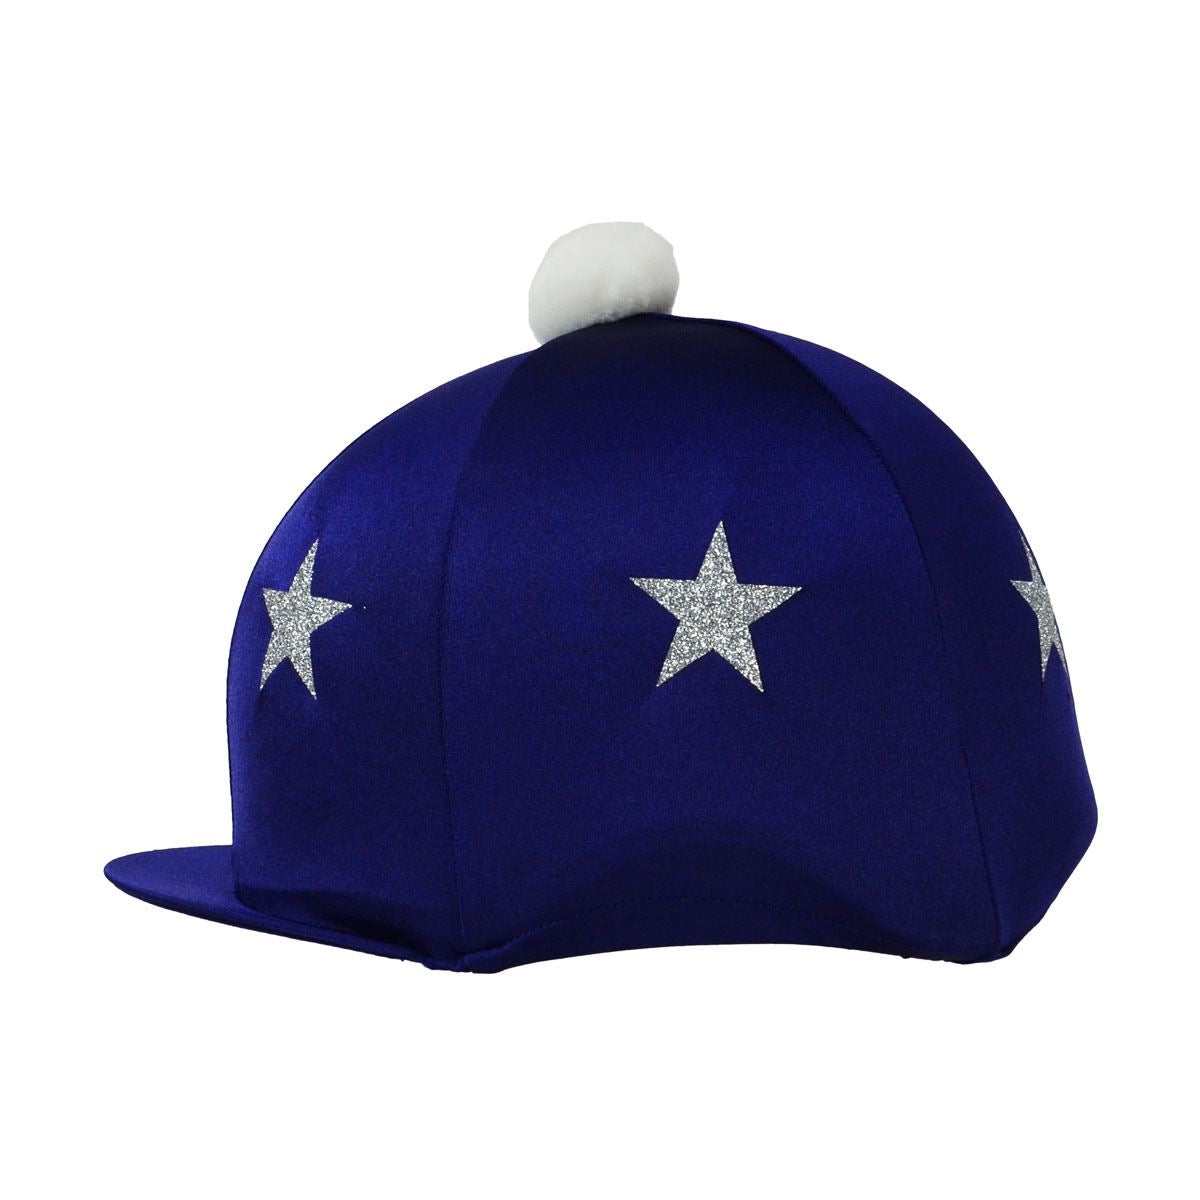 Hy Equestrian Pom Pom Hat Cover with Glitter Star Pattern - Just Horse Riders